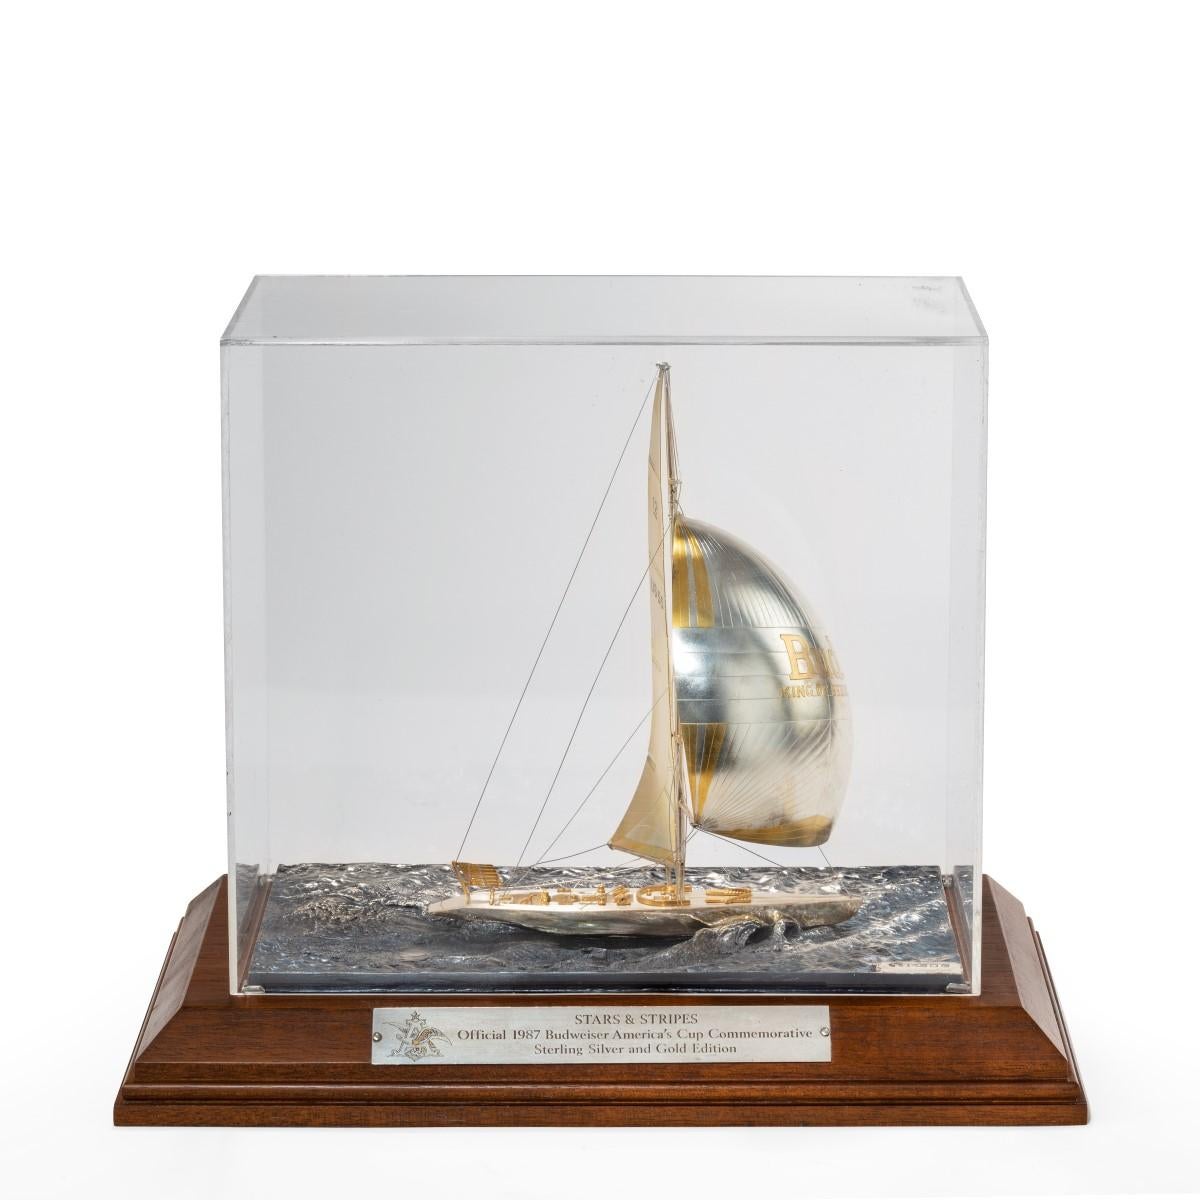 Cased Silver and Gilt Model of America’s Cup Yacht Stars and Stripes, 1987 5